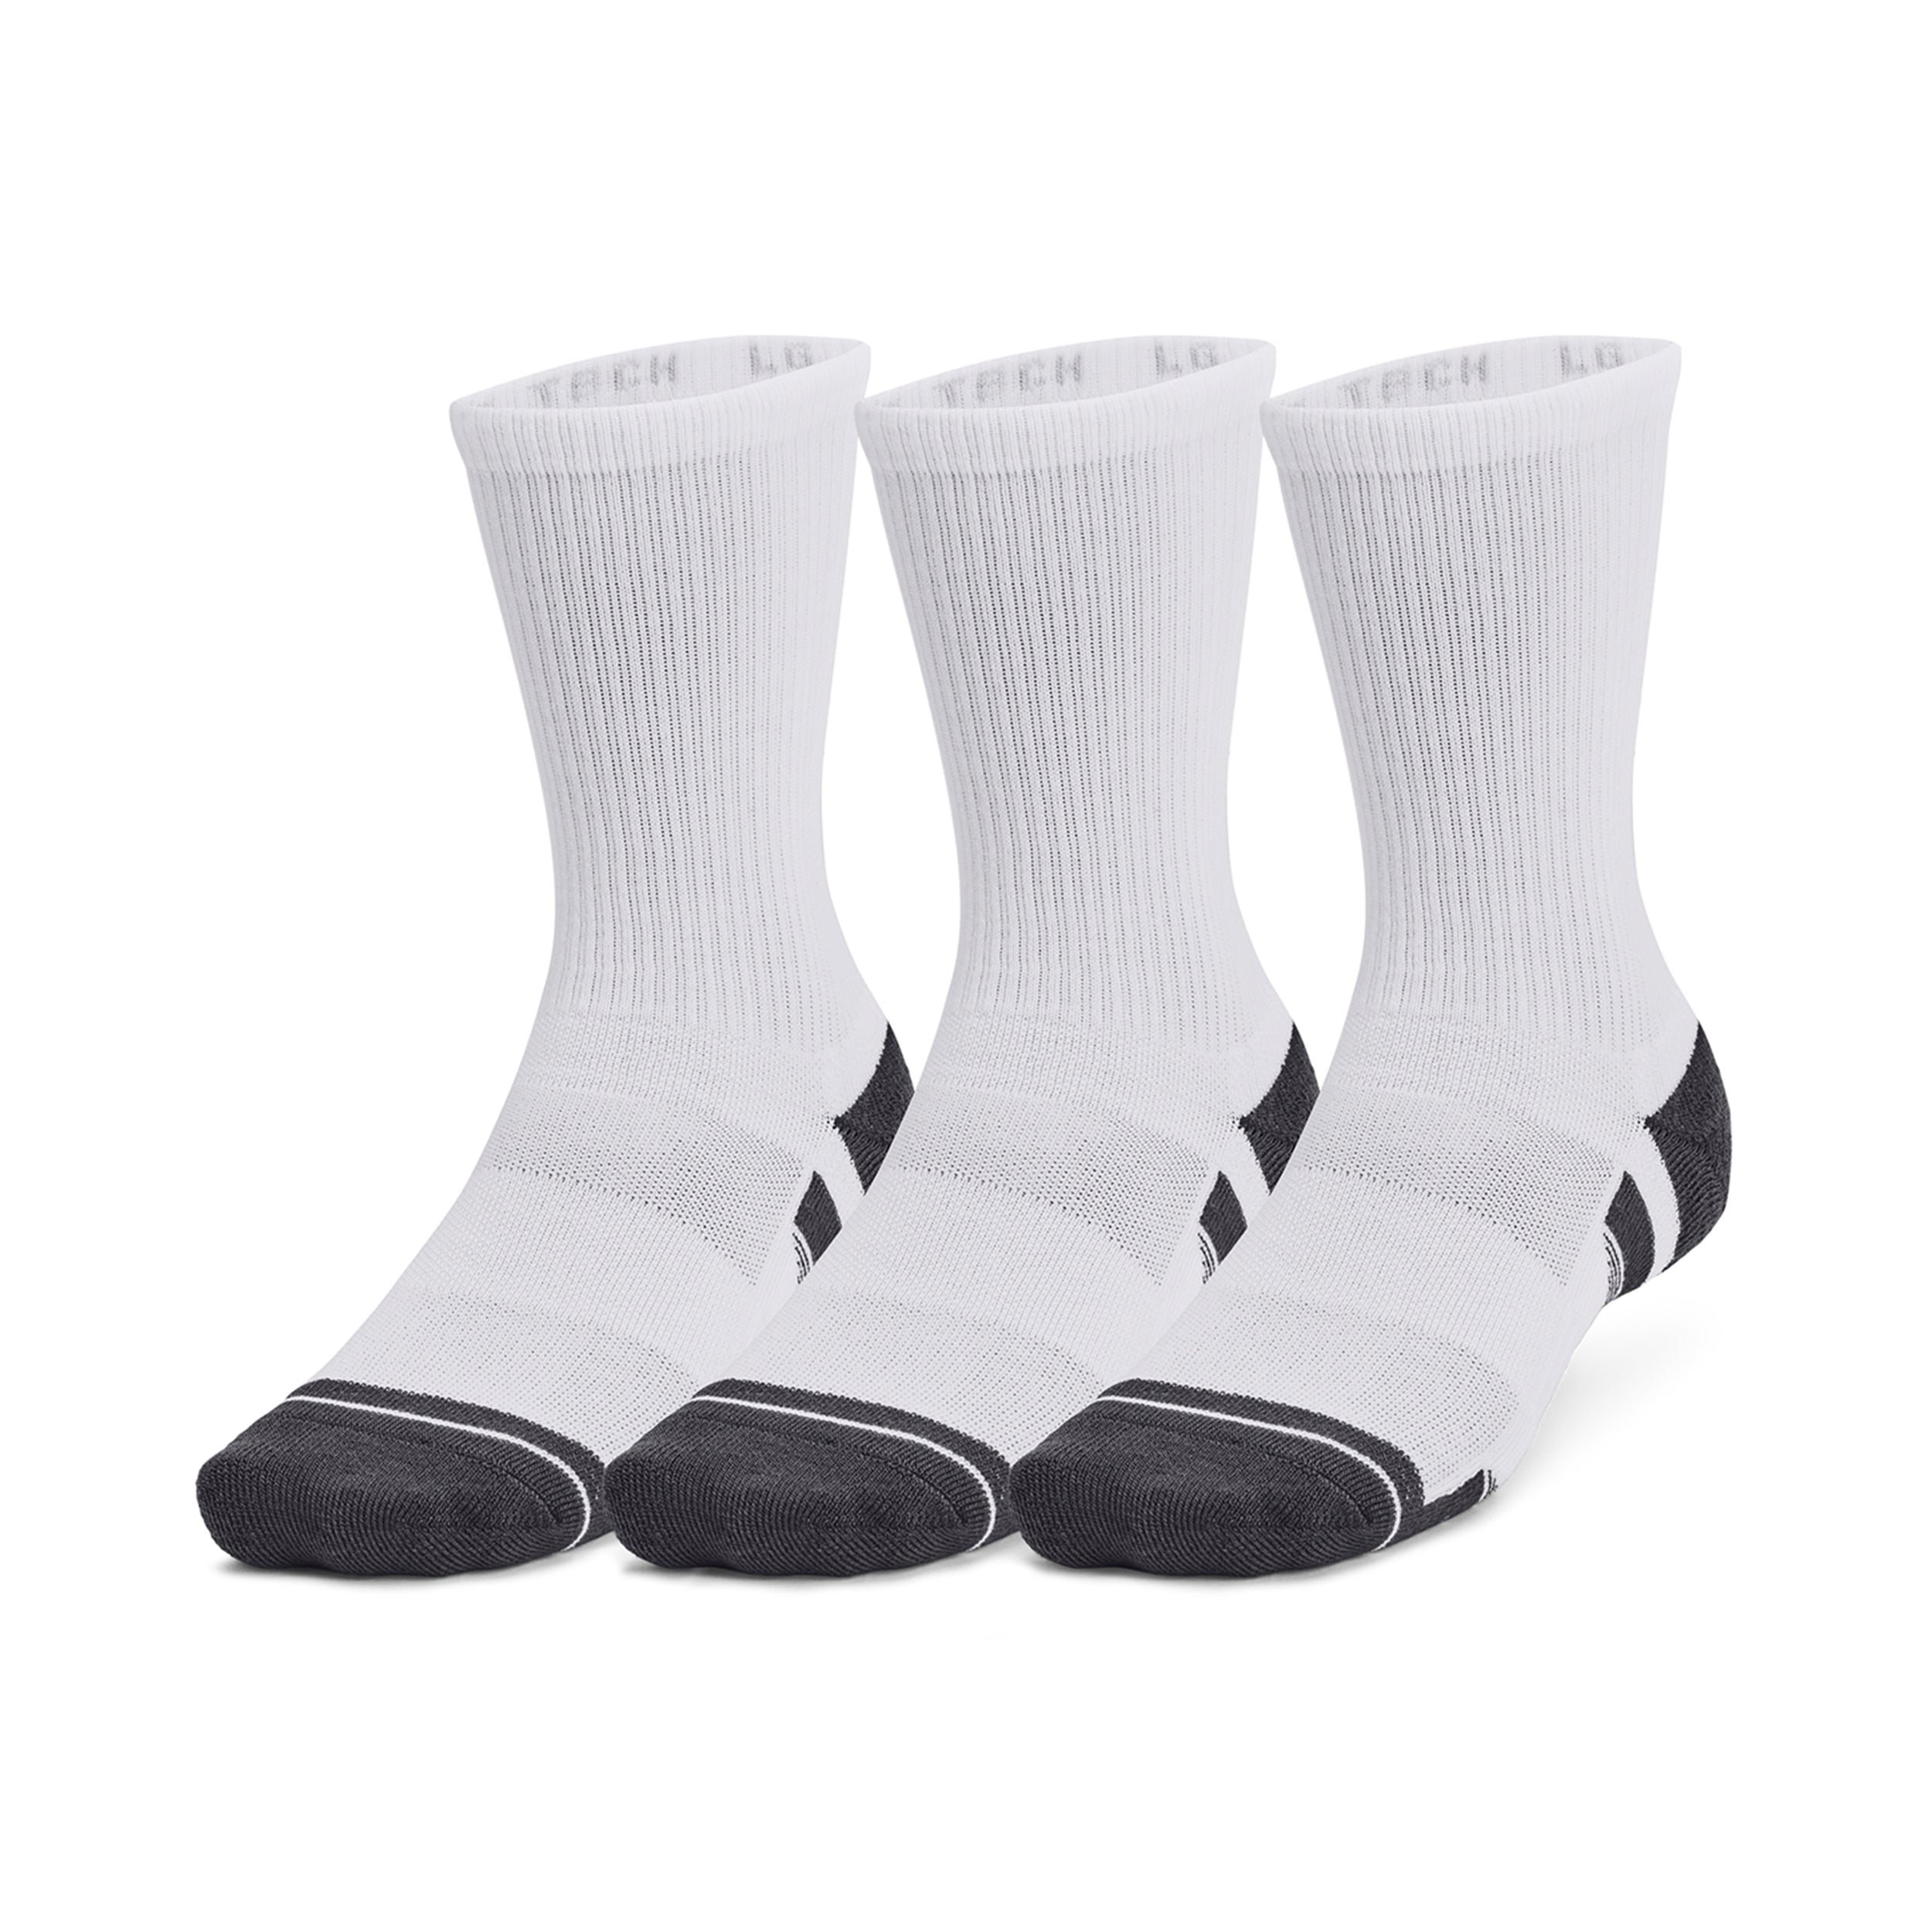 Under Armour Golf Performance Tech Crew Sock - 3 Pack 1379512 White 100 ...